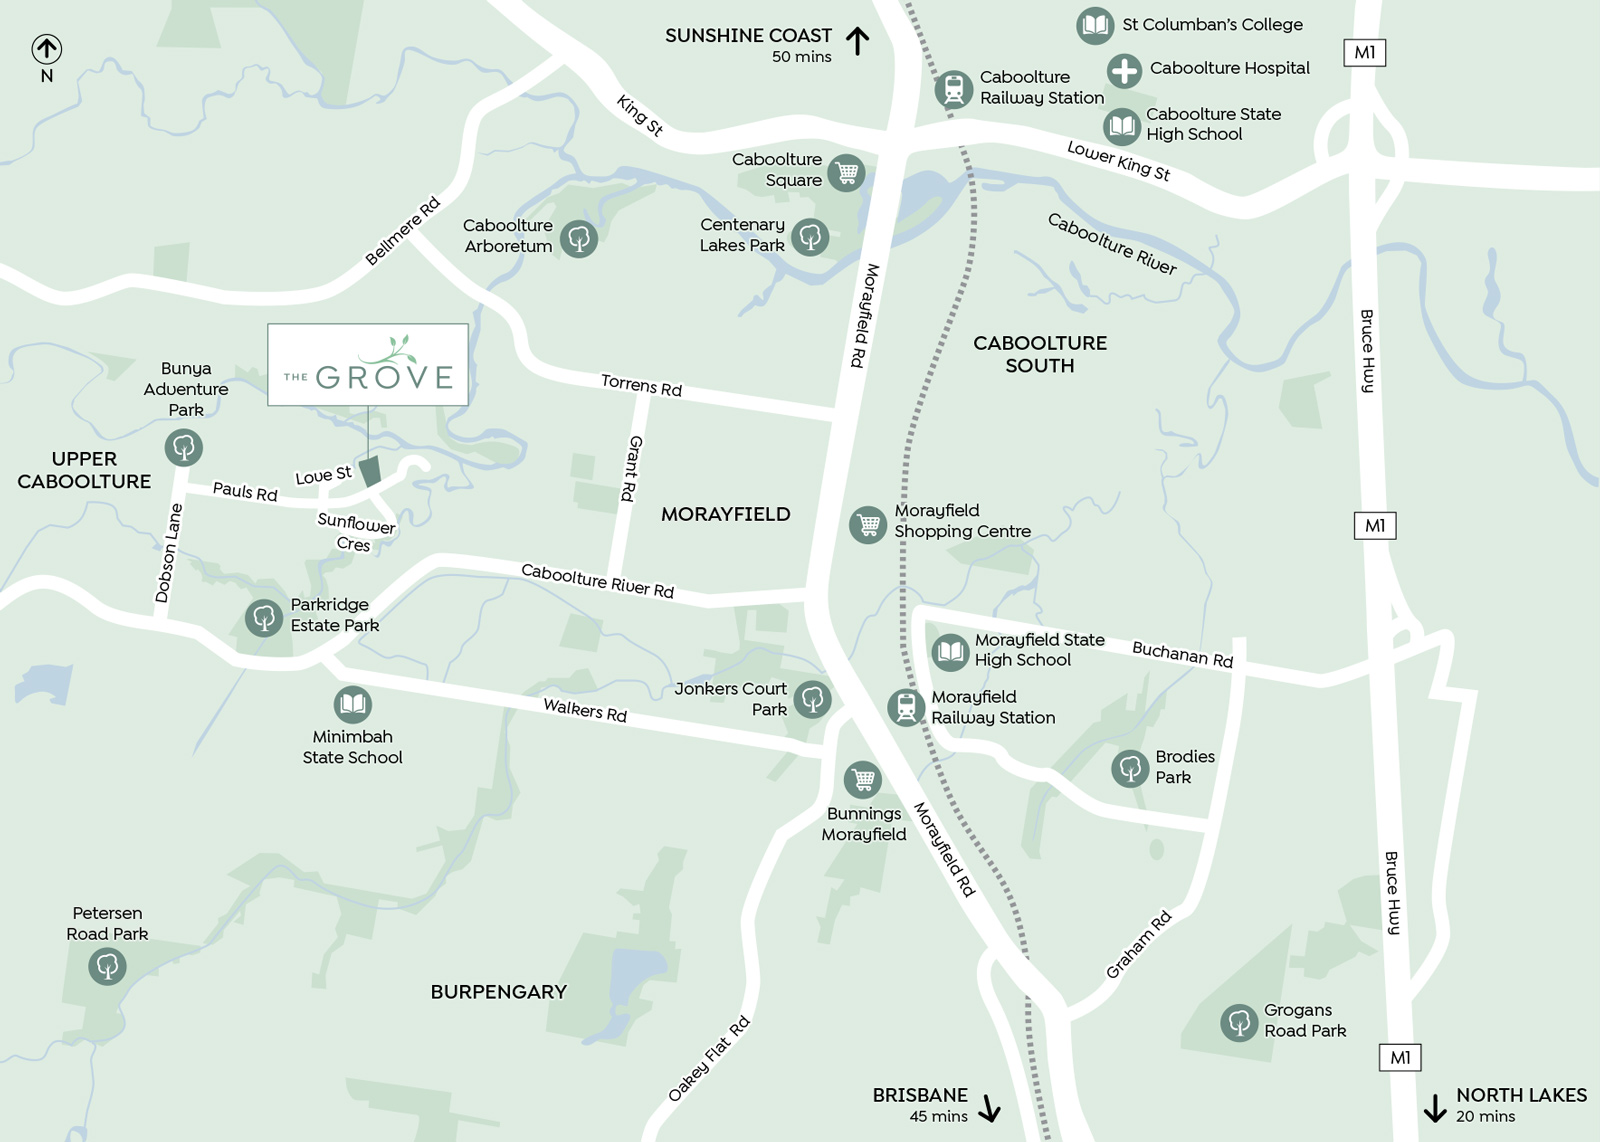 THE-GROVE-Locality-Map